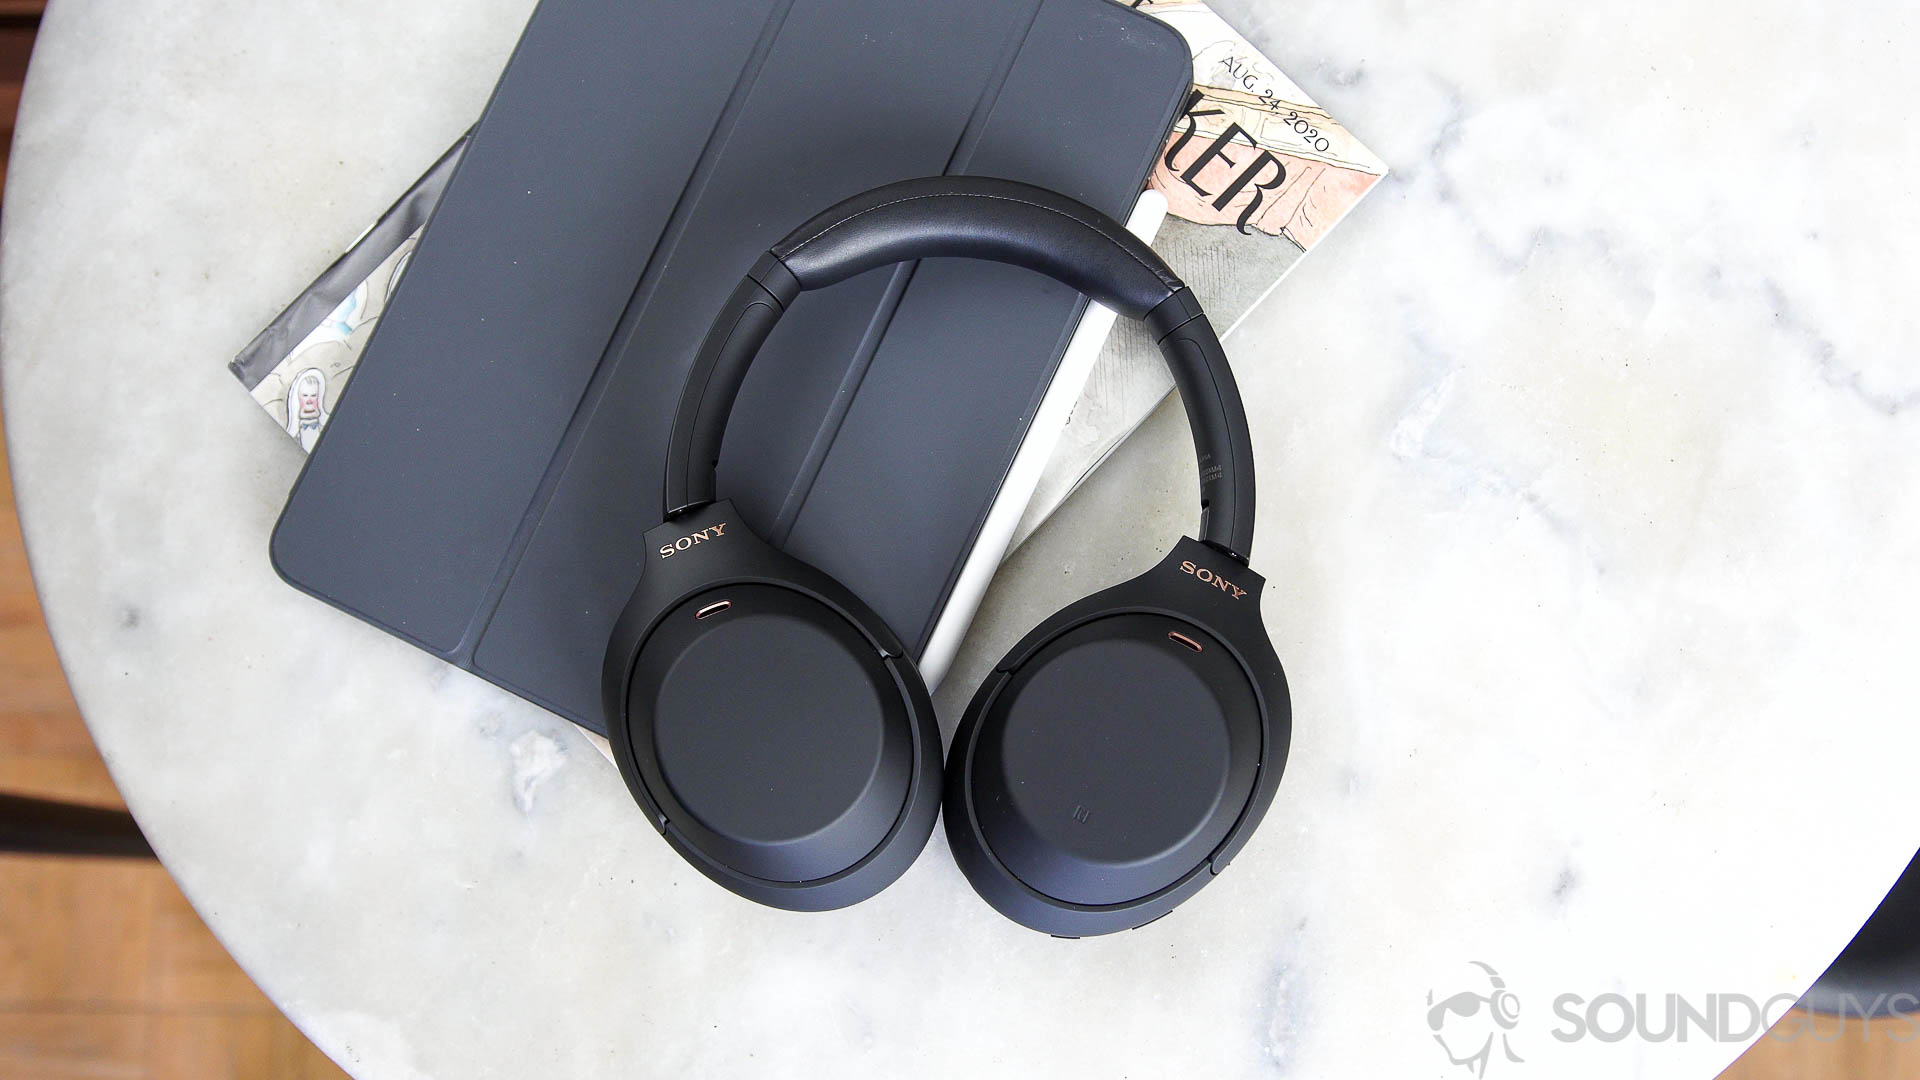 The Sony WH 1000XM4 noise cancelling headphones on top of an ipad.